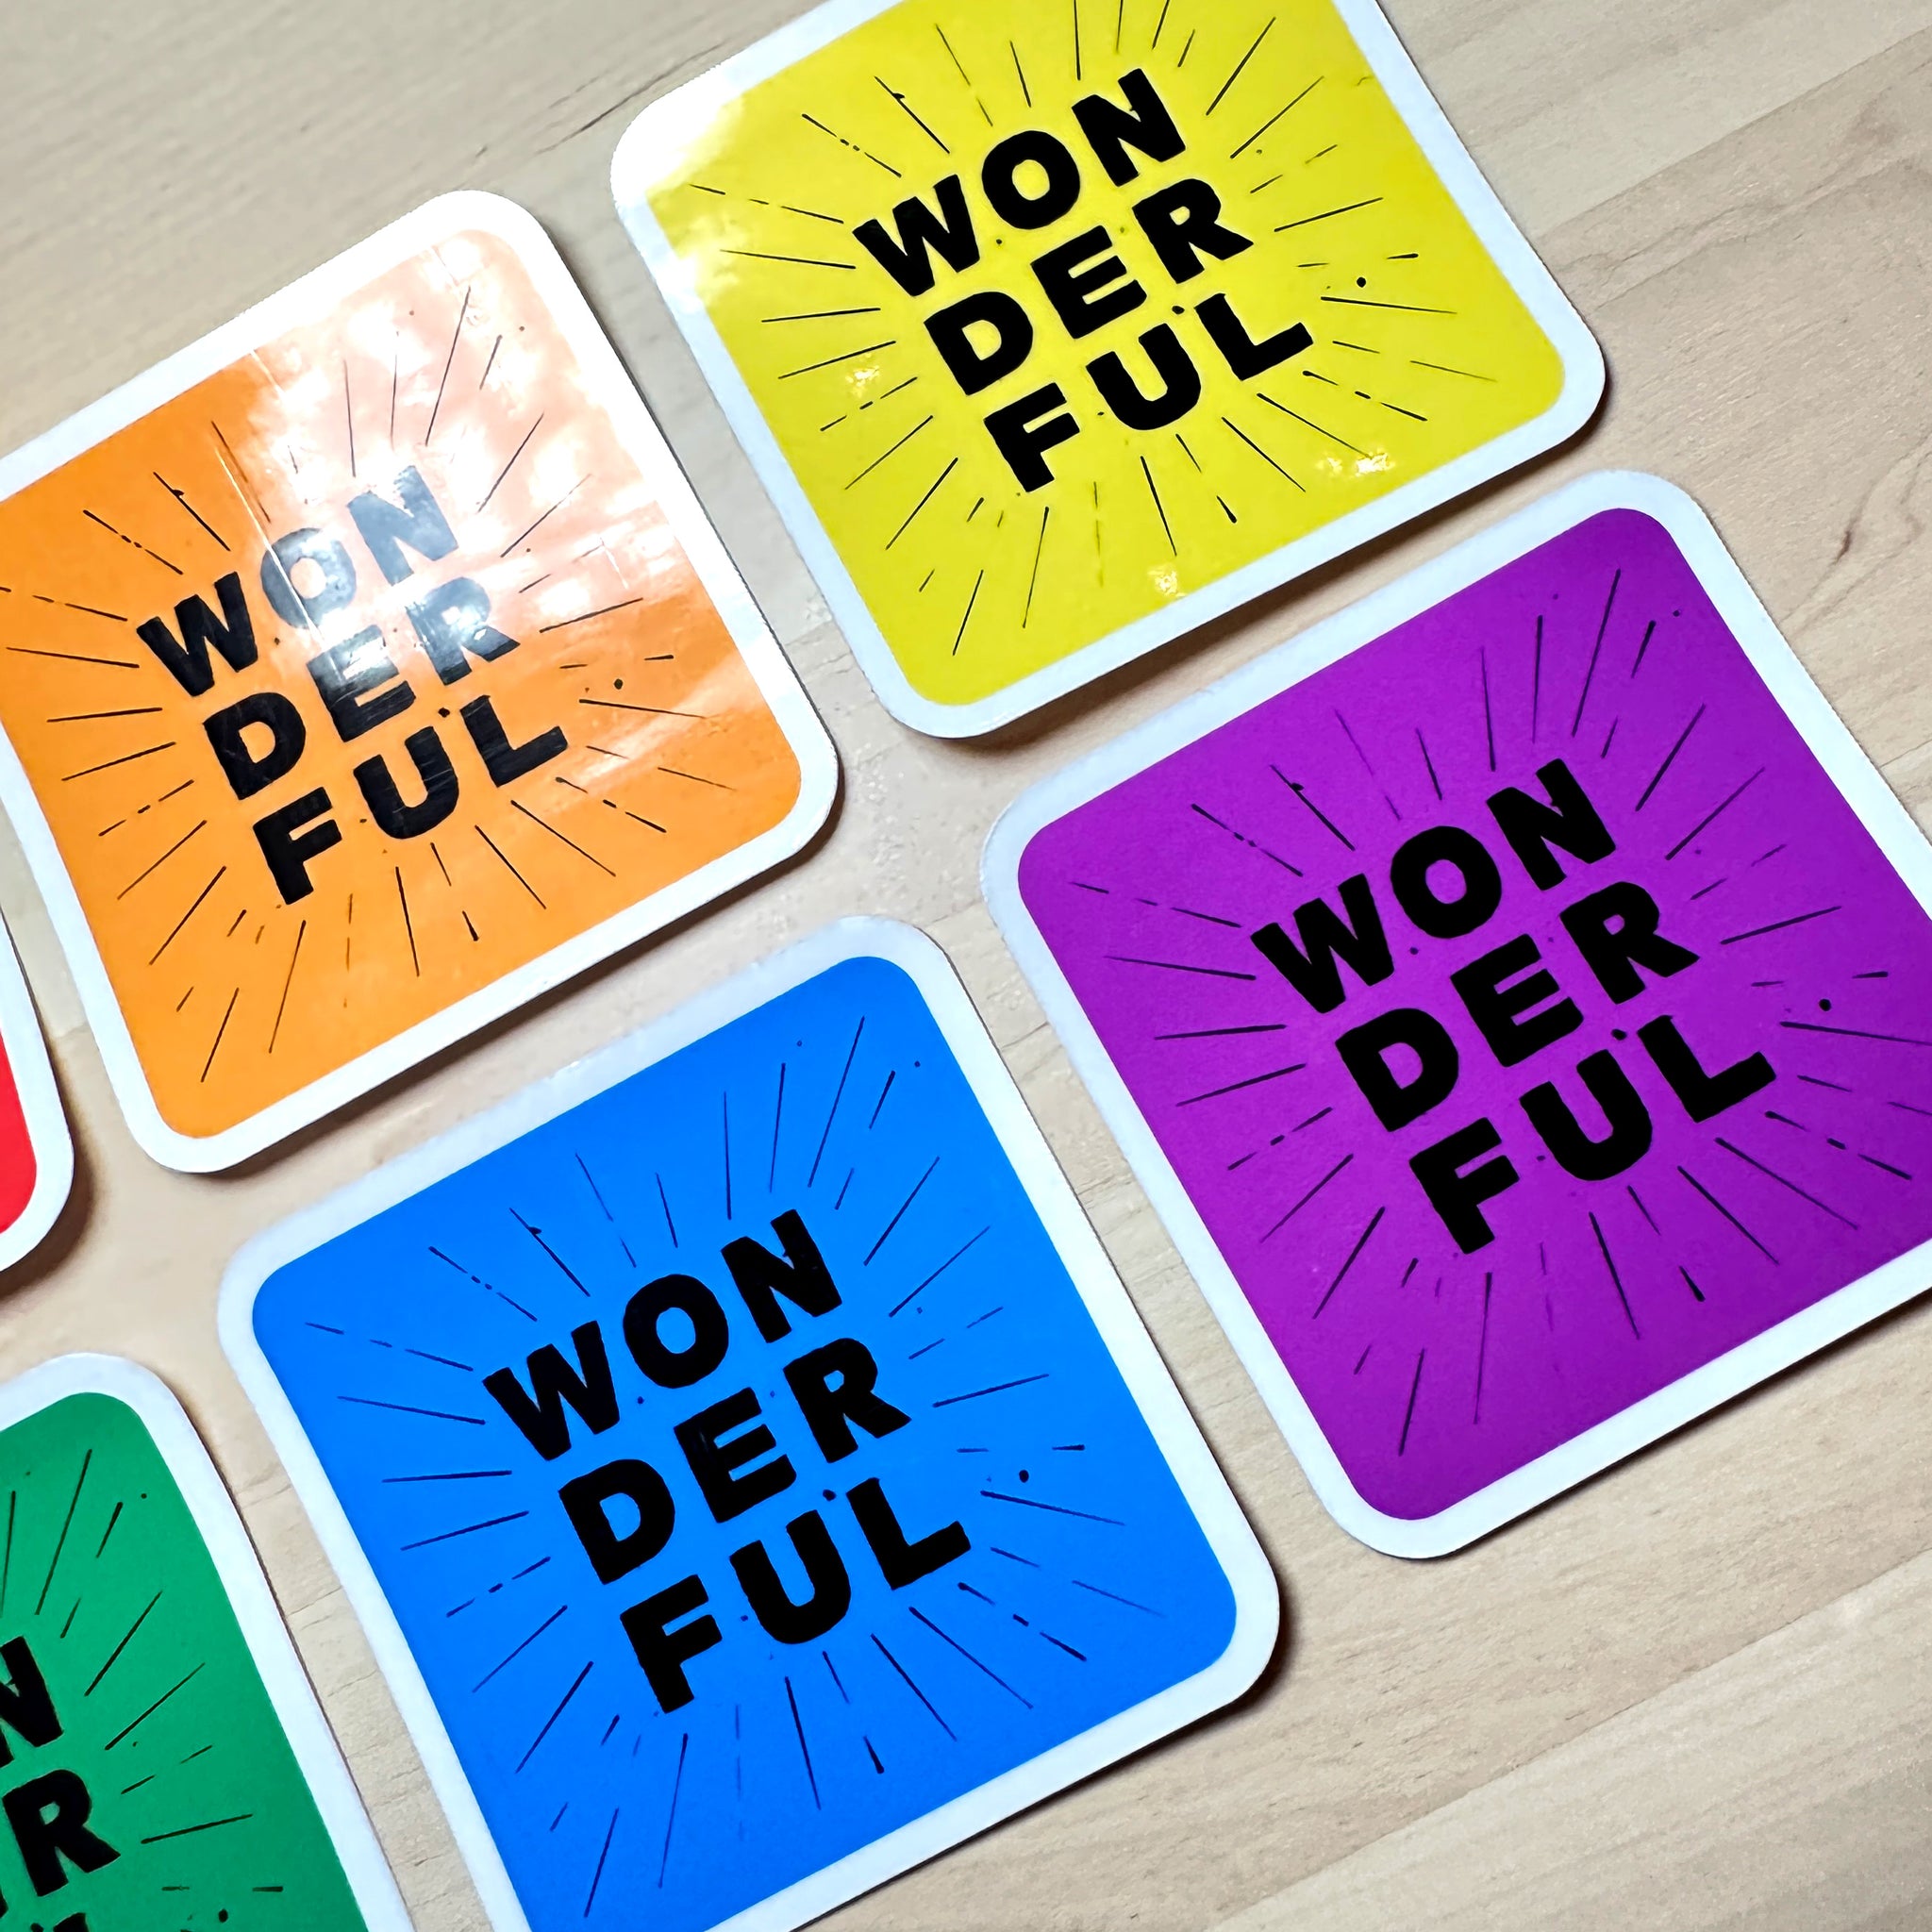 photo of 4 waterproof vinyl sticker with the word wonderful in 3 layers of black text on blue, orange, yellow and purple  background